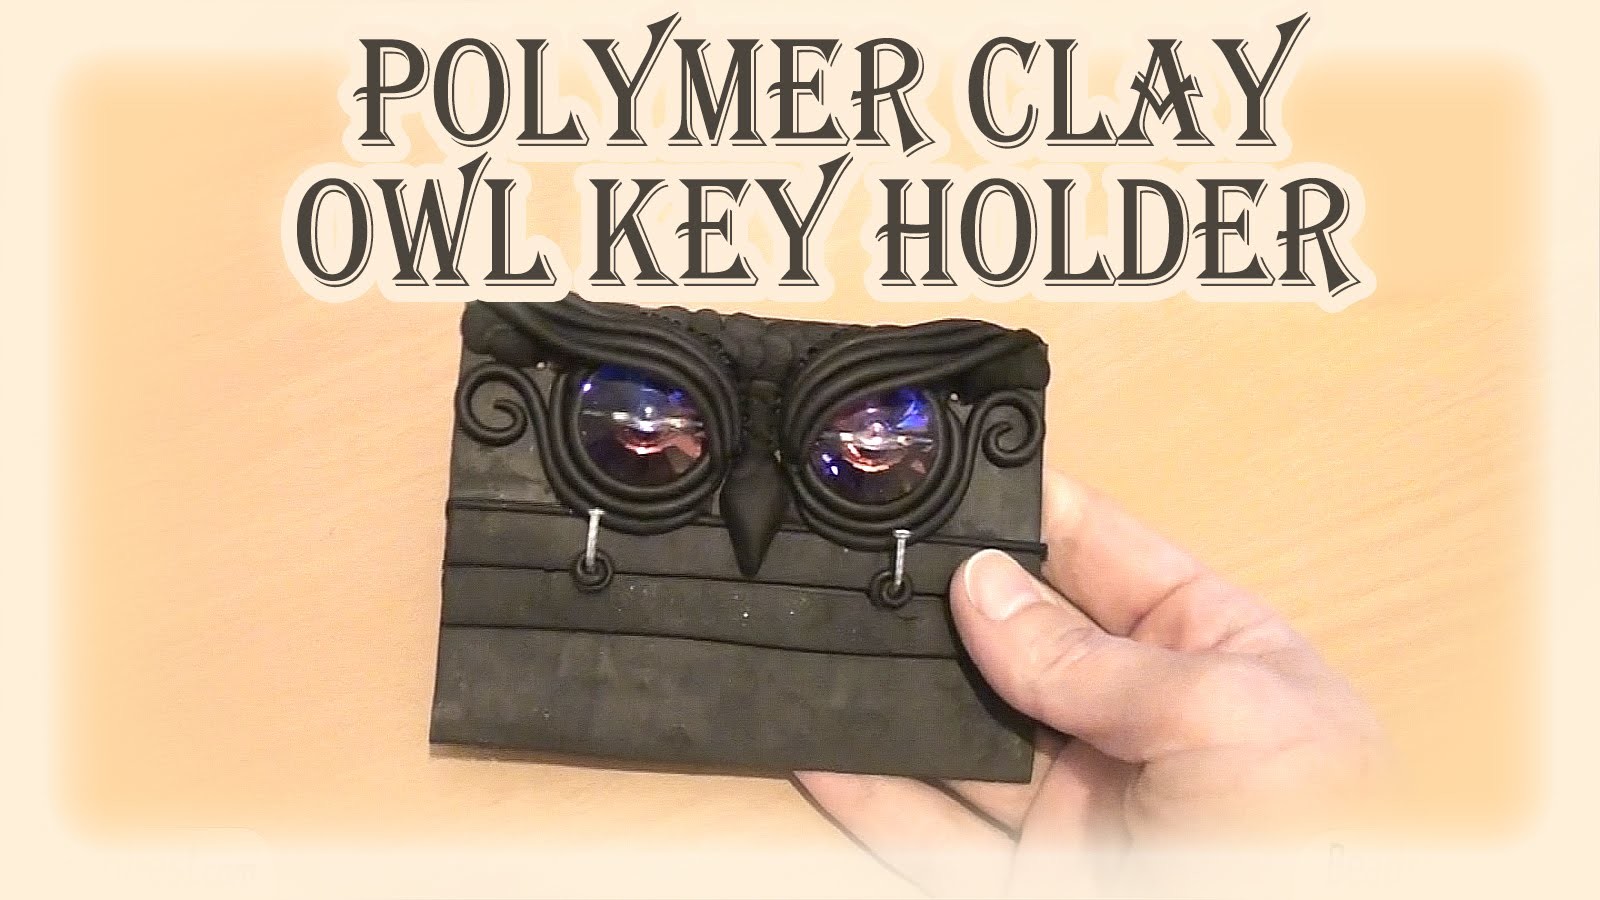 BeadsFriends: Polymer Clay - Owl key holder made with polymer clay